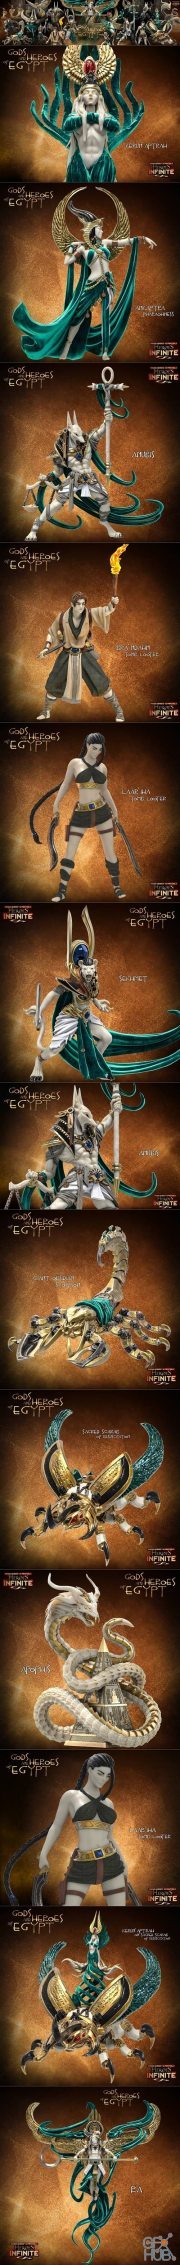 Heroes Infinite Gods and Heroes of Egypt – 3D Print